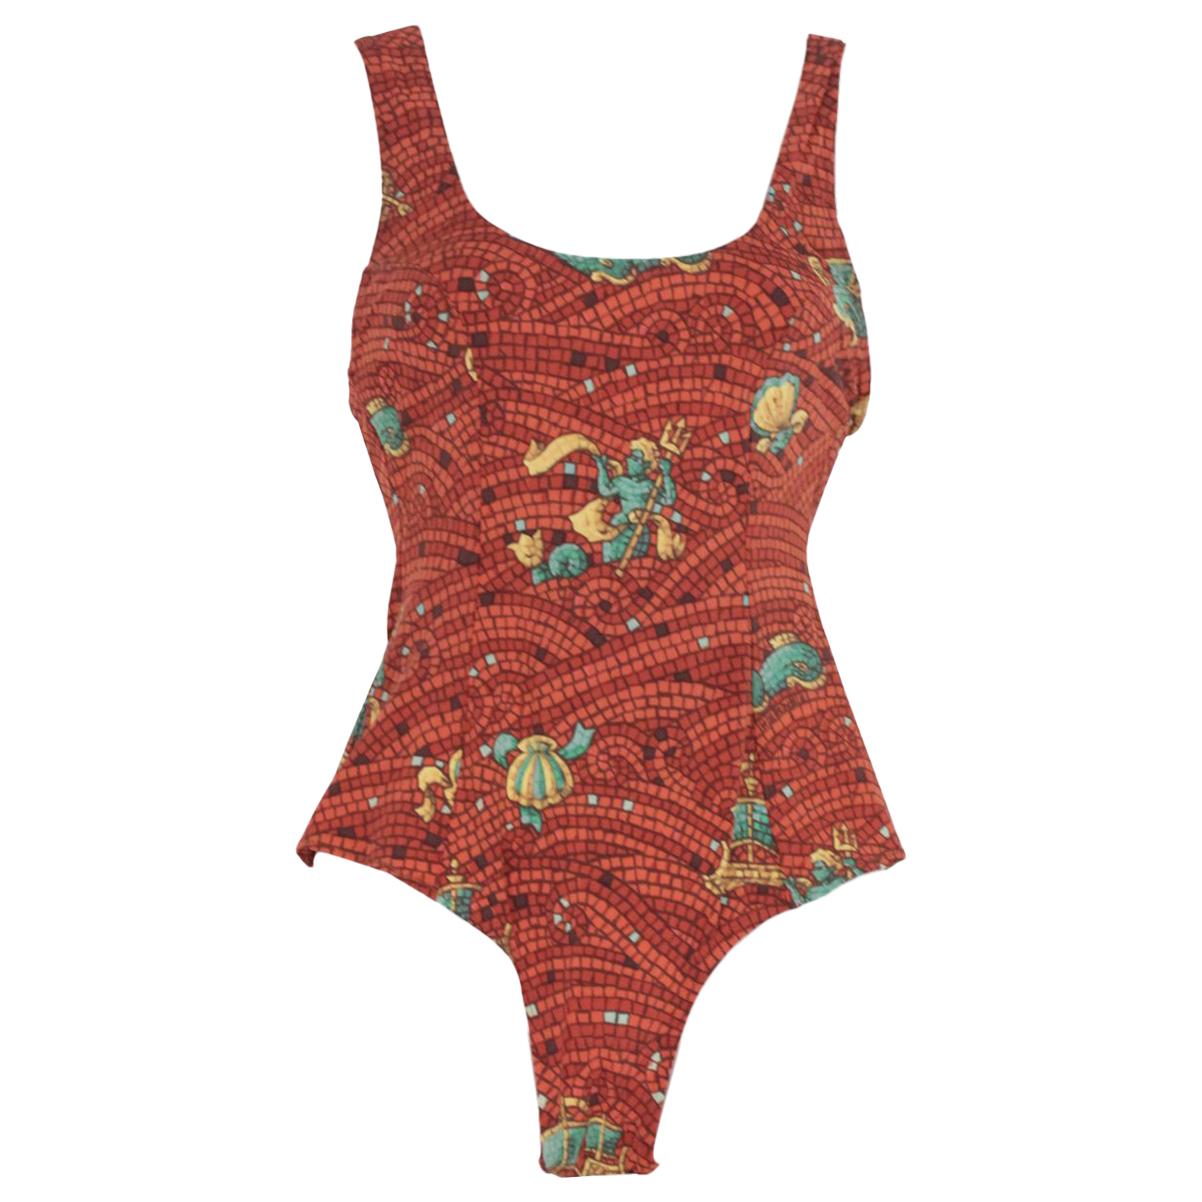 Hermes Vintage Brown Mosaic Print One Piece Swimsuit Size 38 FR